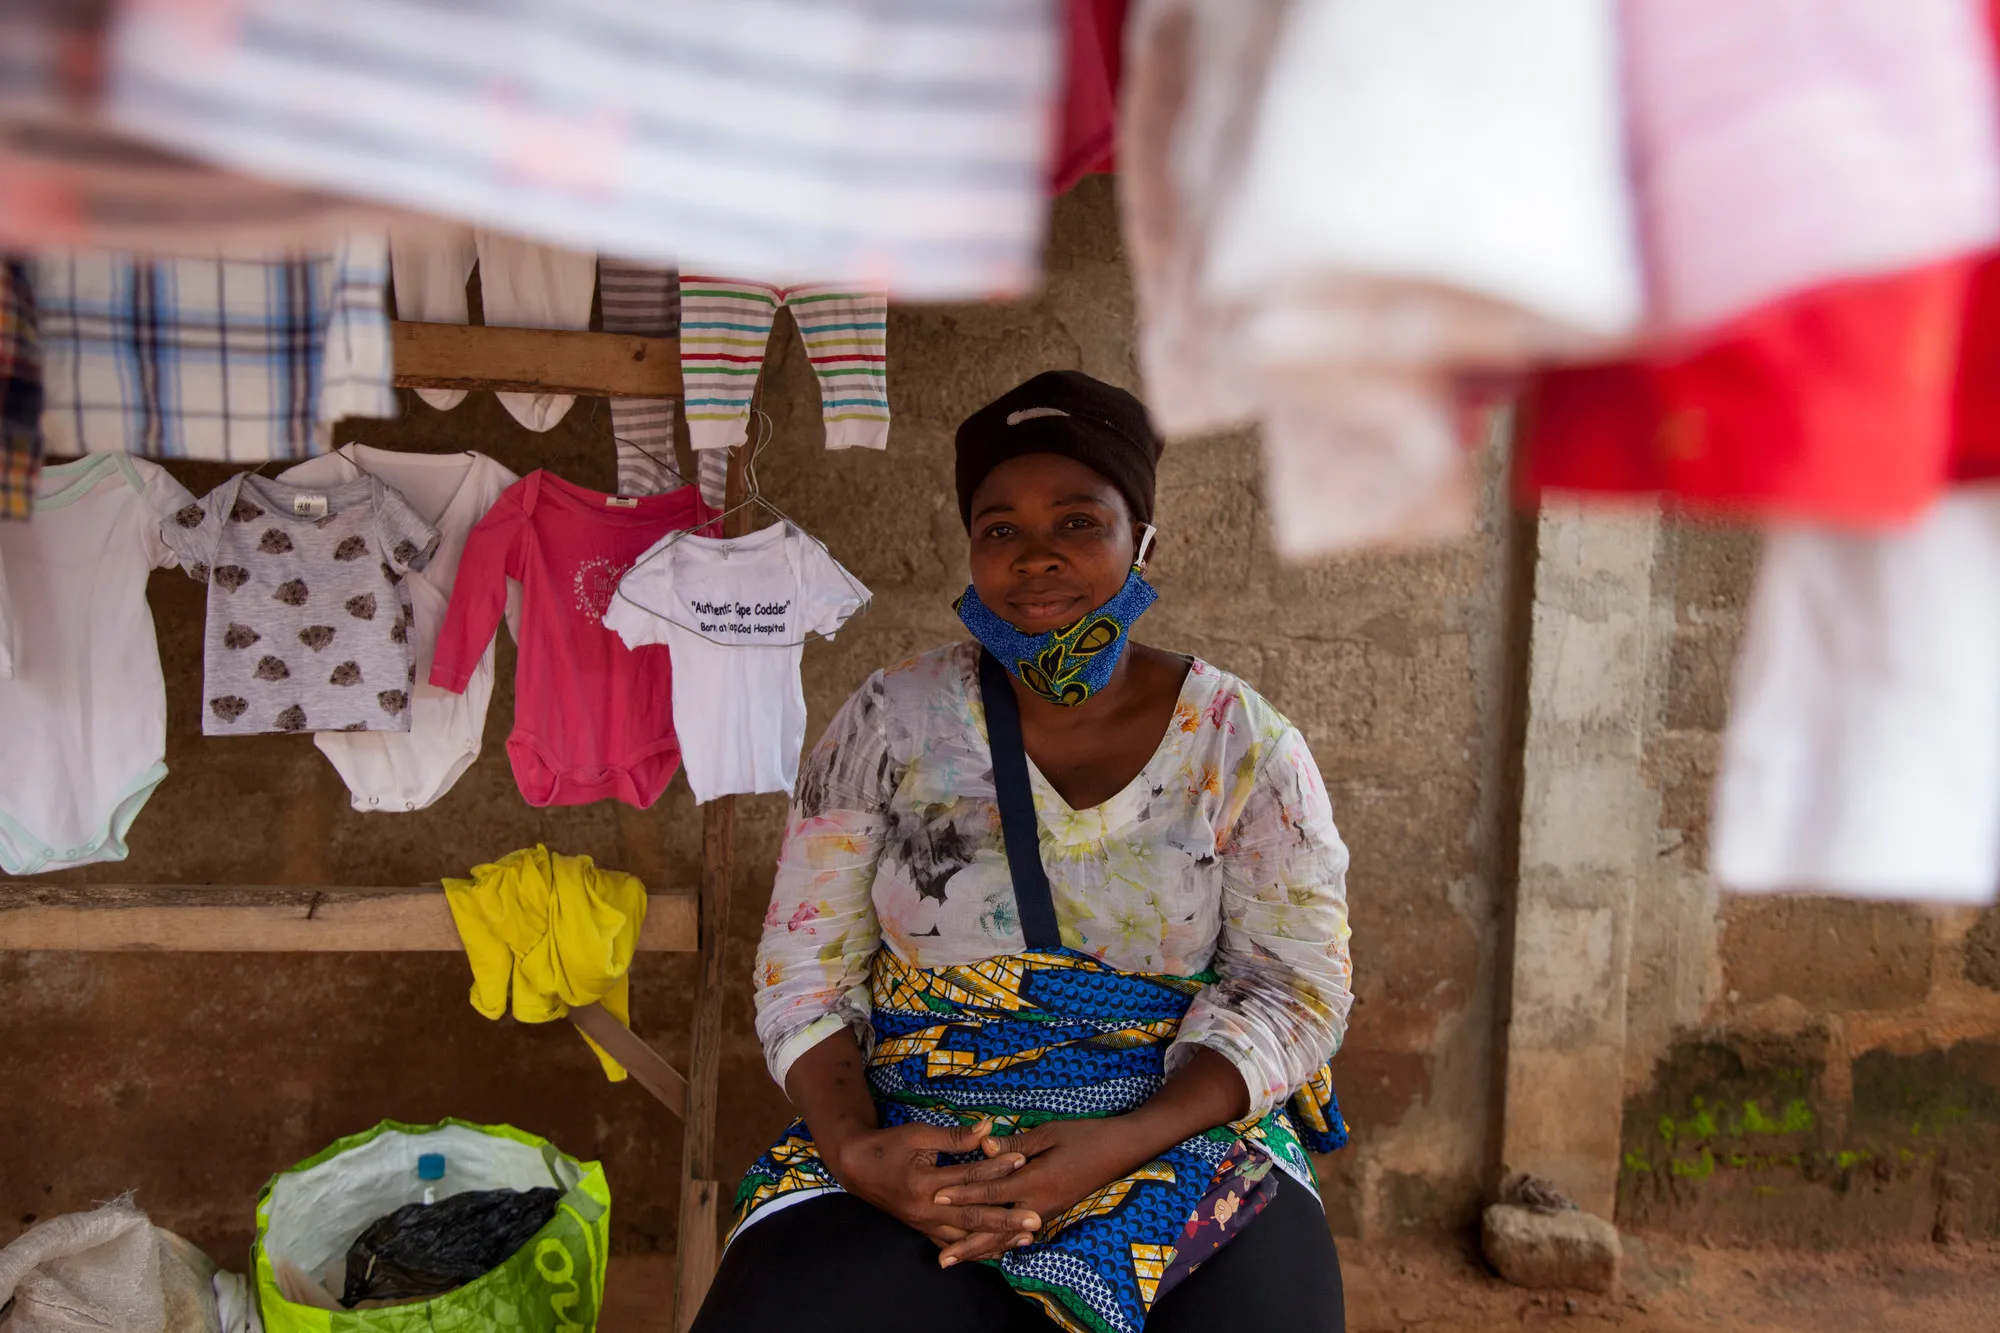 A woman sits in a stall selling clothes in an open-air market.